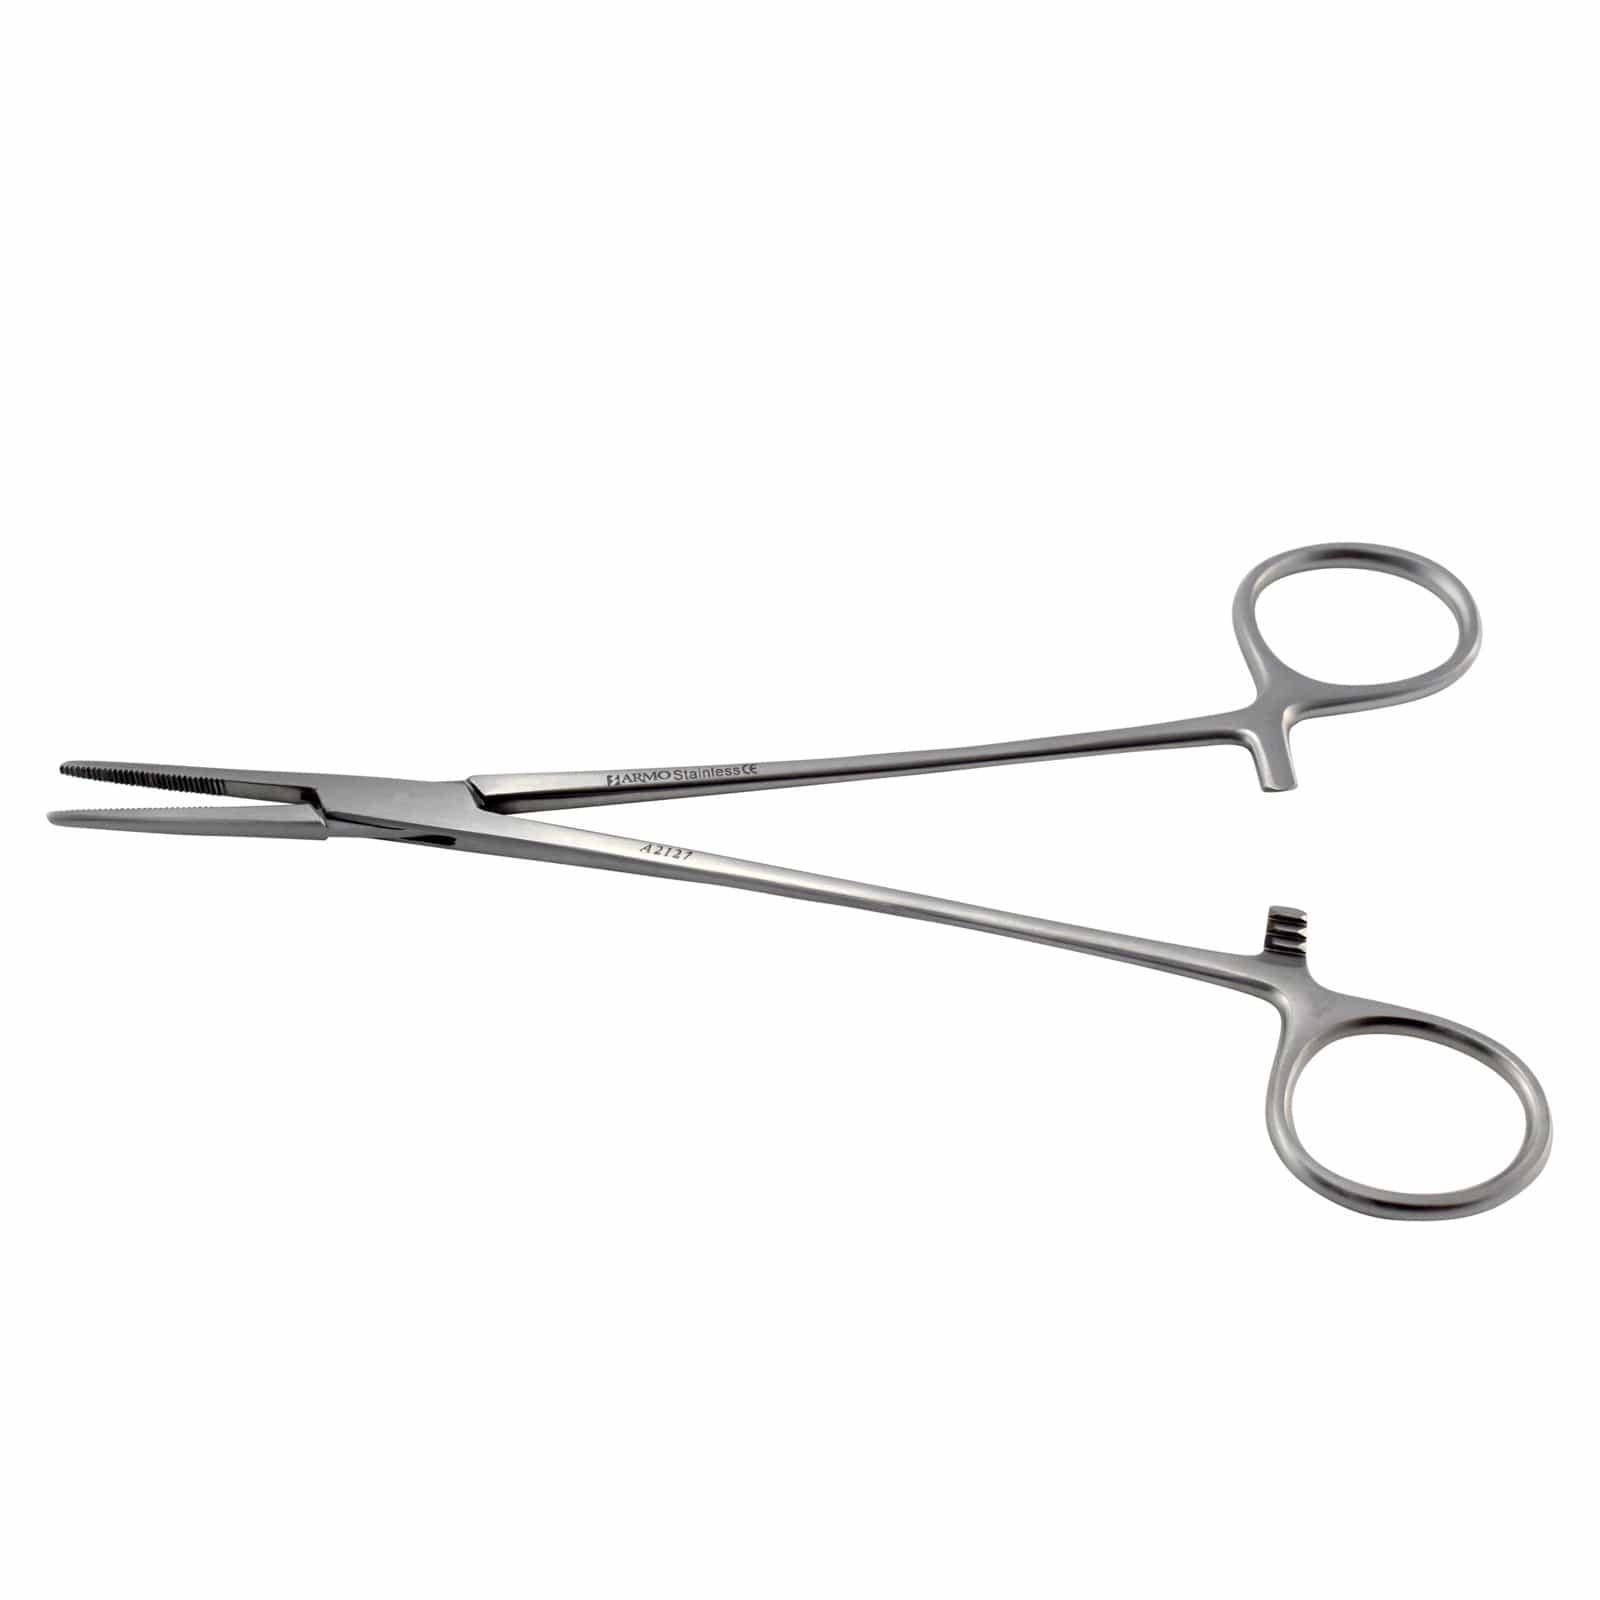 Armo Surgical Instruments 18cm / Straight Armo Kelly Artery Forceps